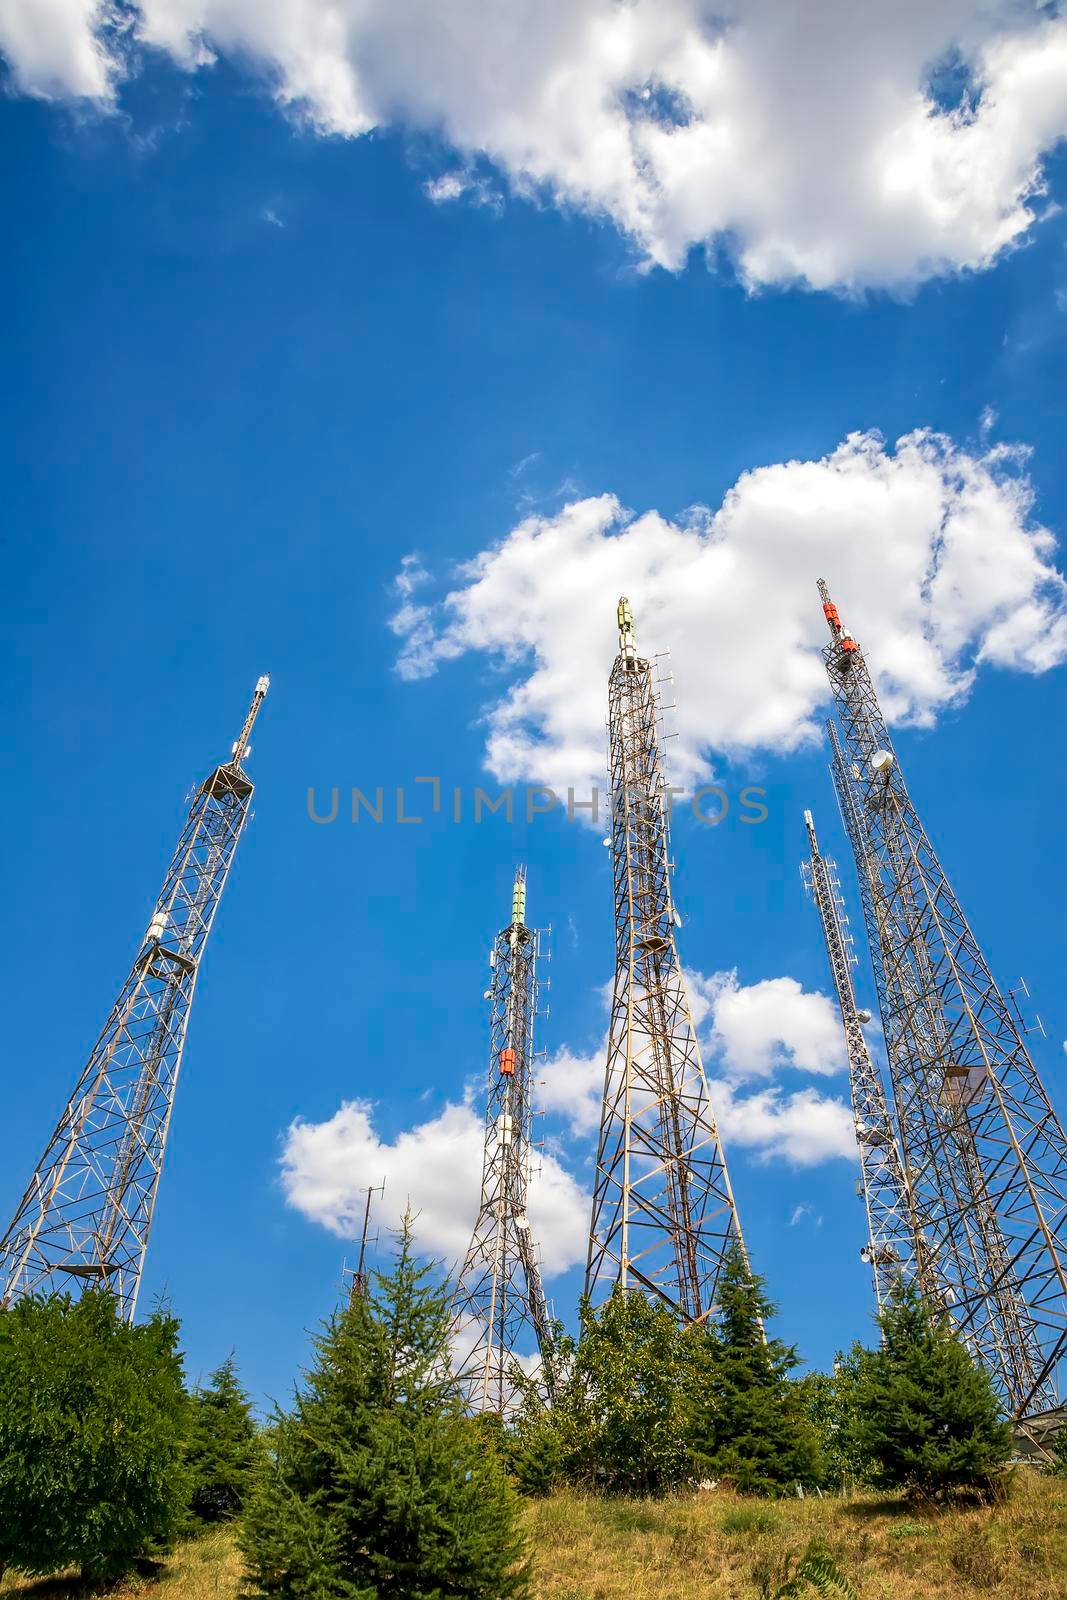 communication towers with control devices and antennas, transmitters and repeaters for mobile communications 